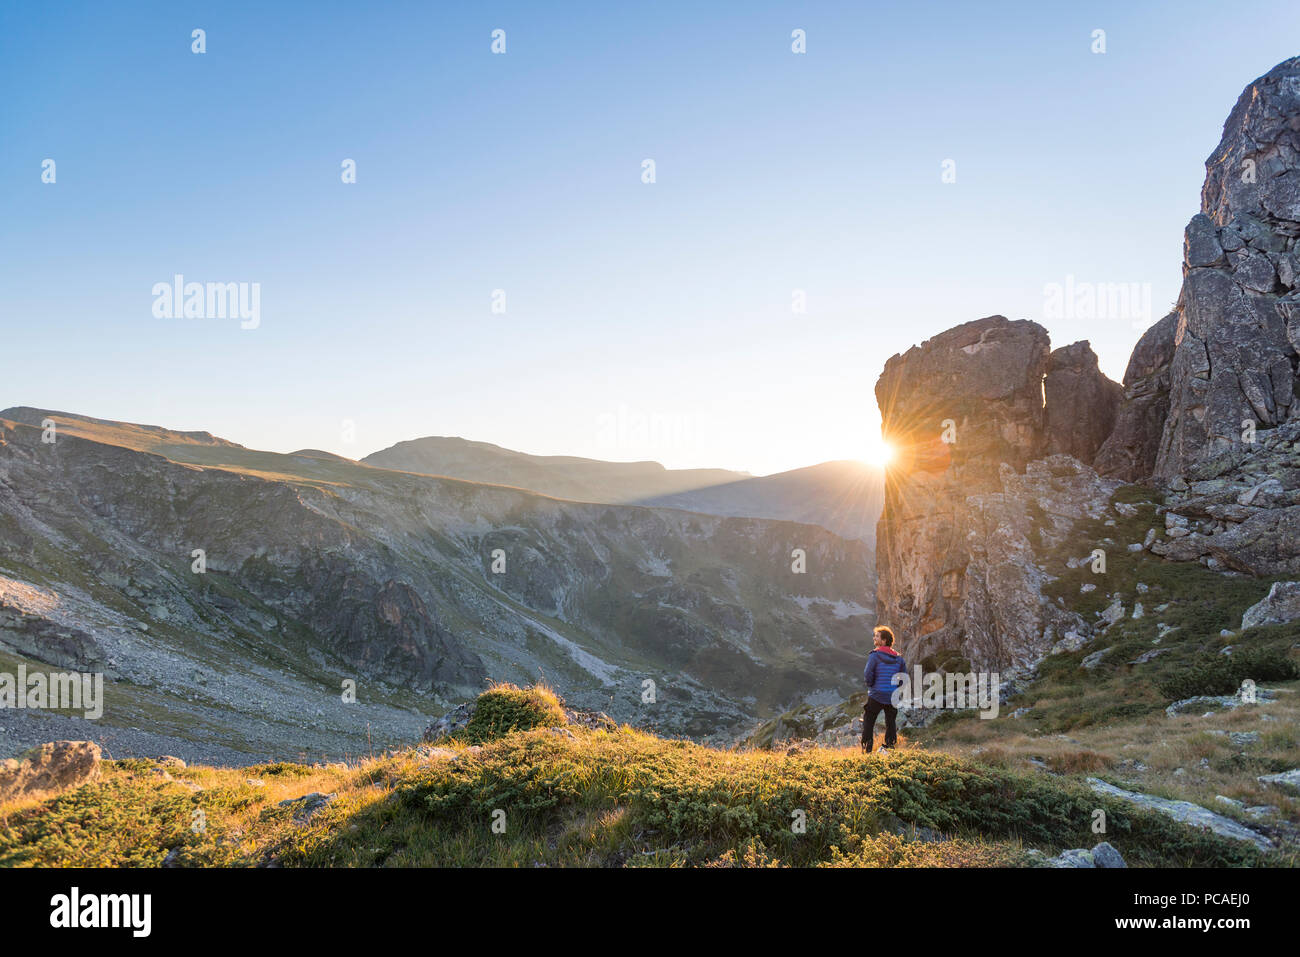 The last rays of sun disappear behind a rock face after a day of trekking in the Rila Mountains, Bulgaria, Europe Stock Photo